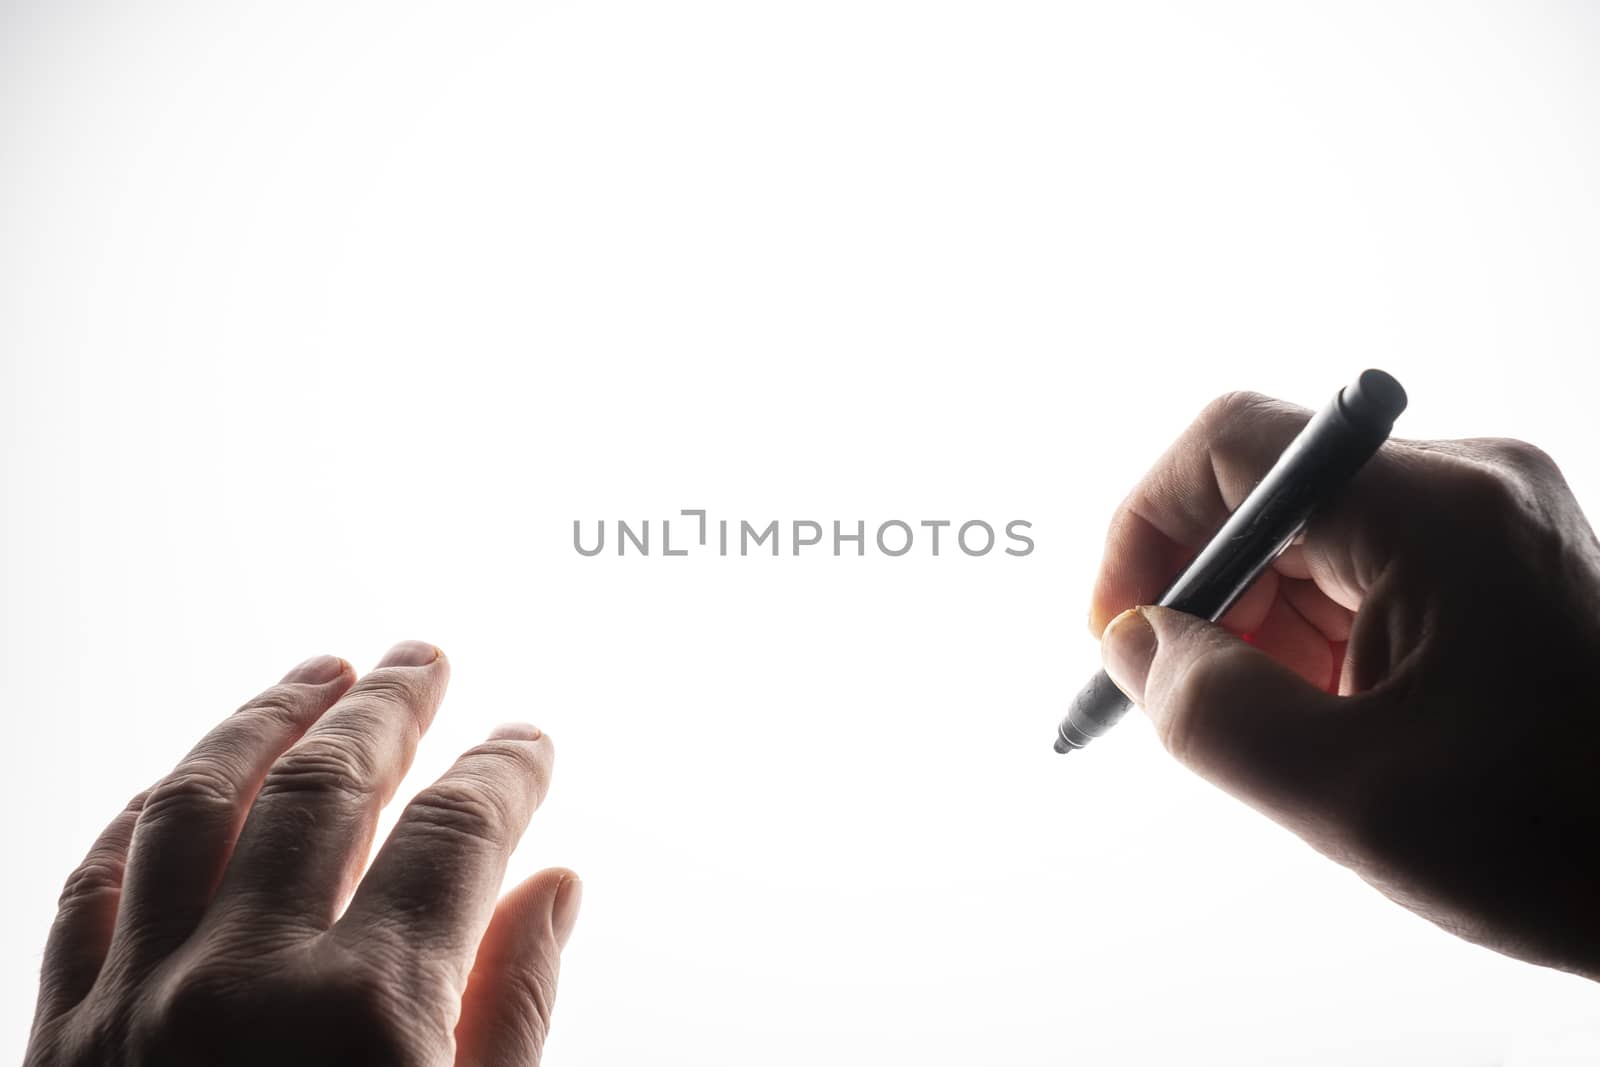 write on a backlit surface by sergiodv